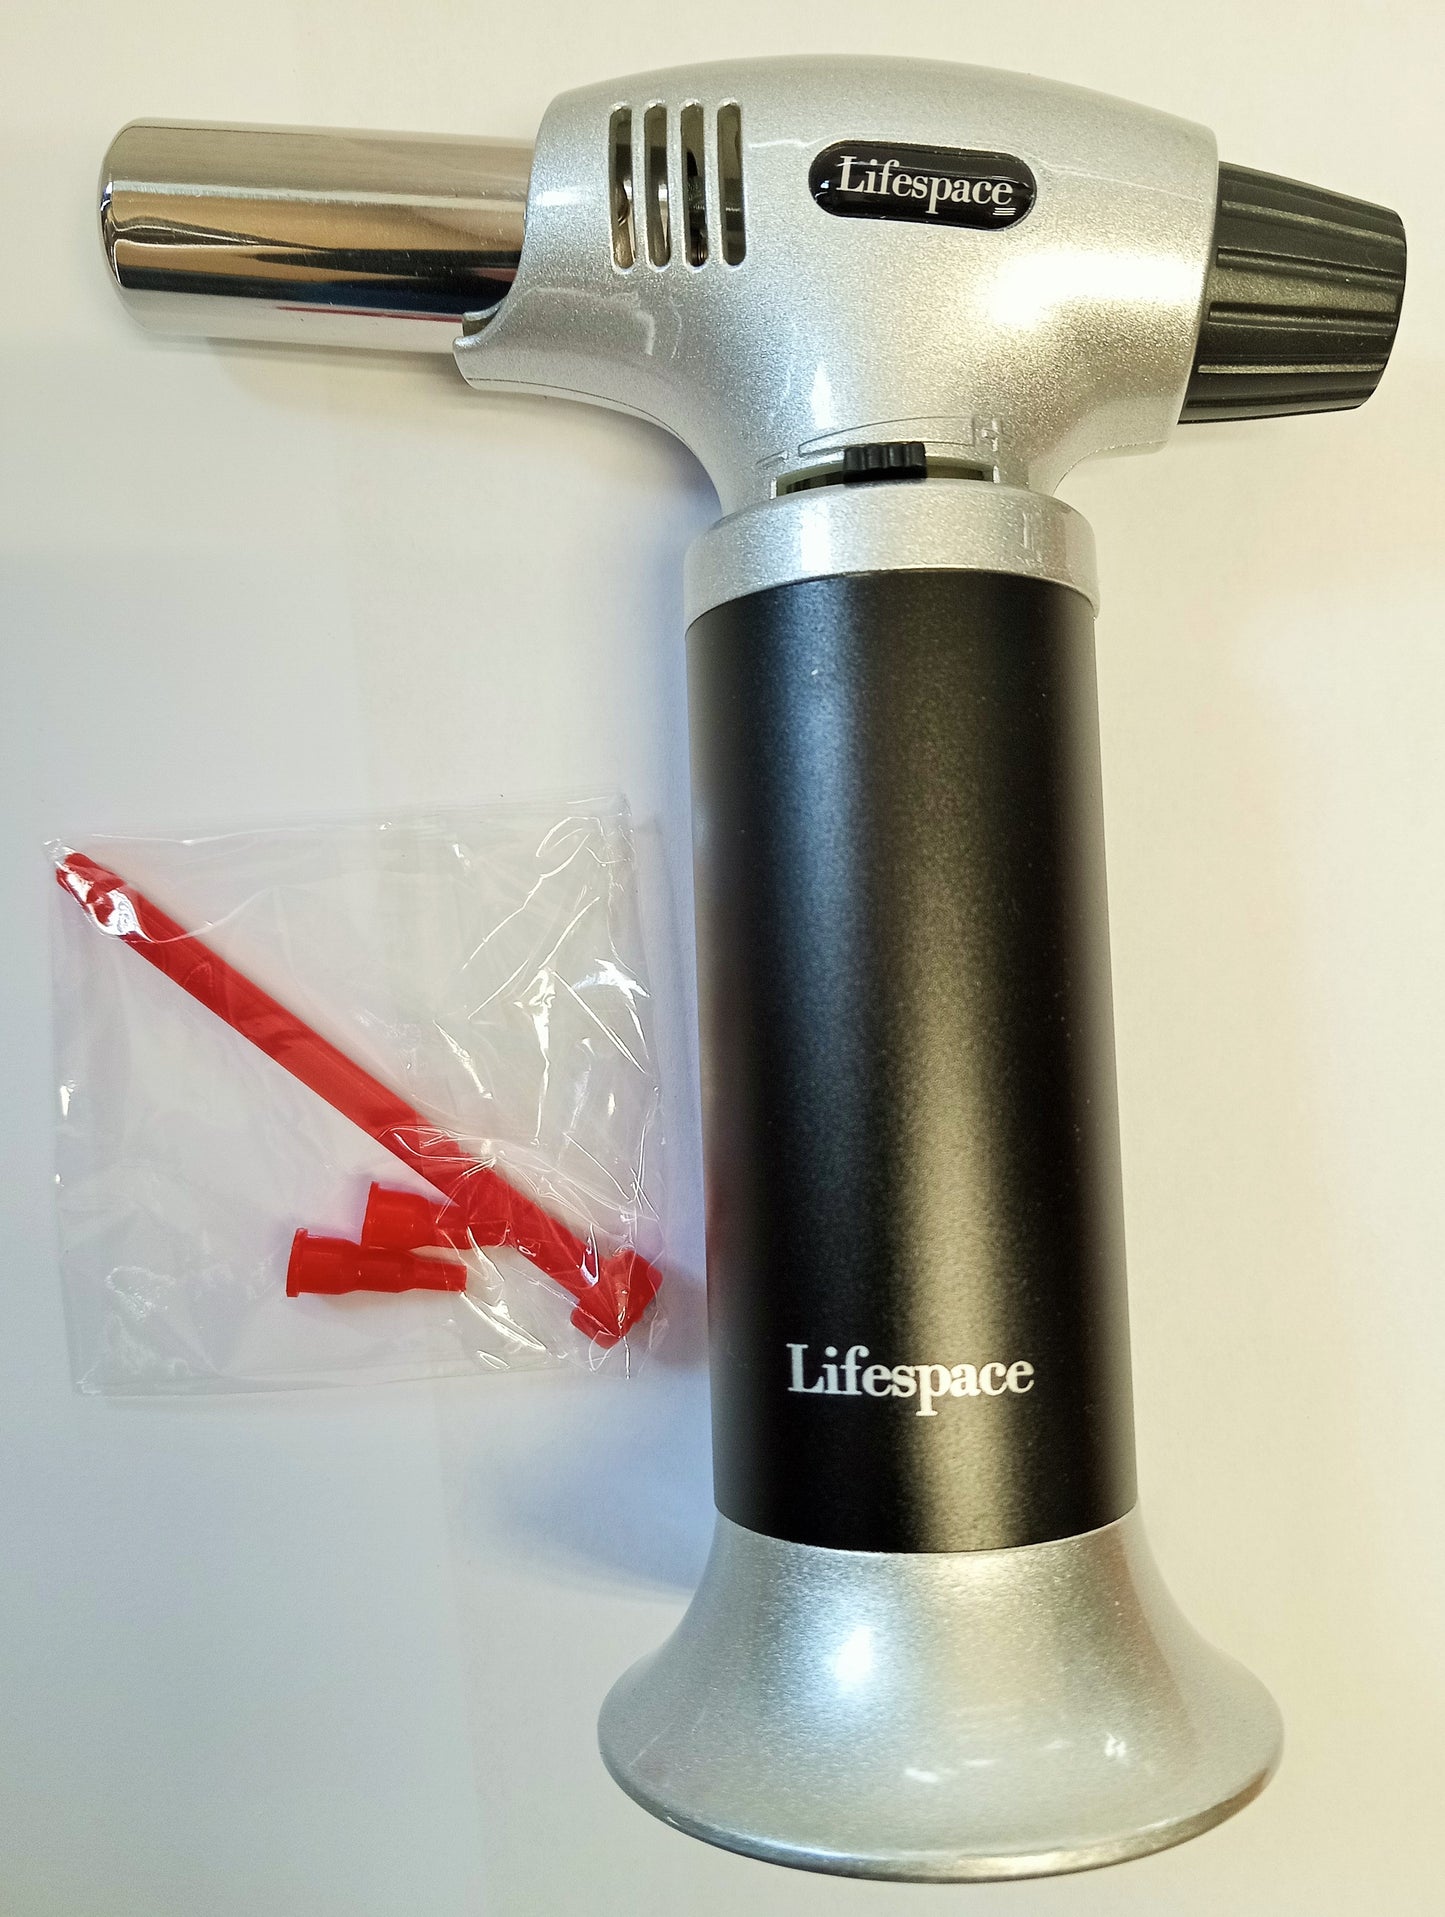 Lifespace Grill Kitchen Creme Brulee Blow Torch Burner with FREE filler nozzle